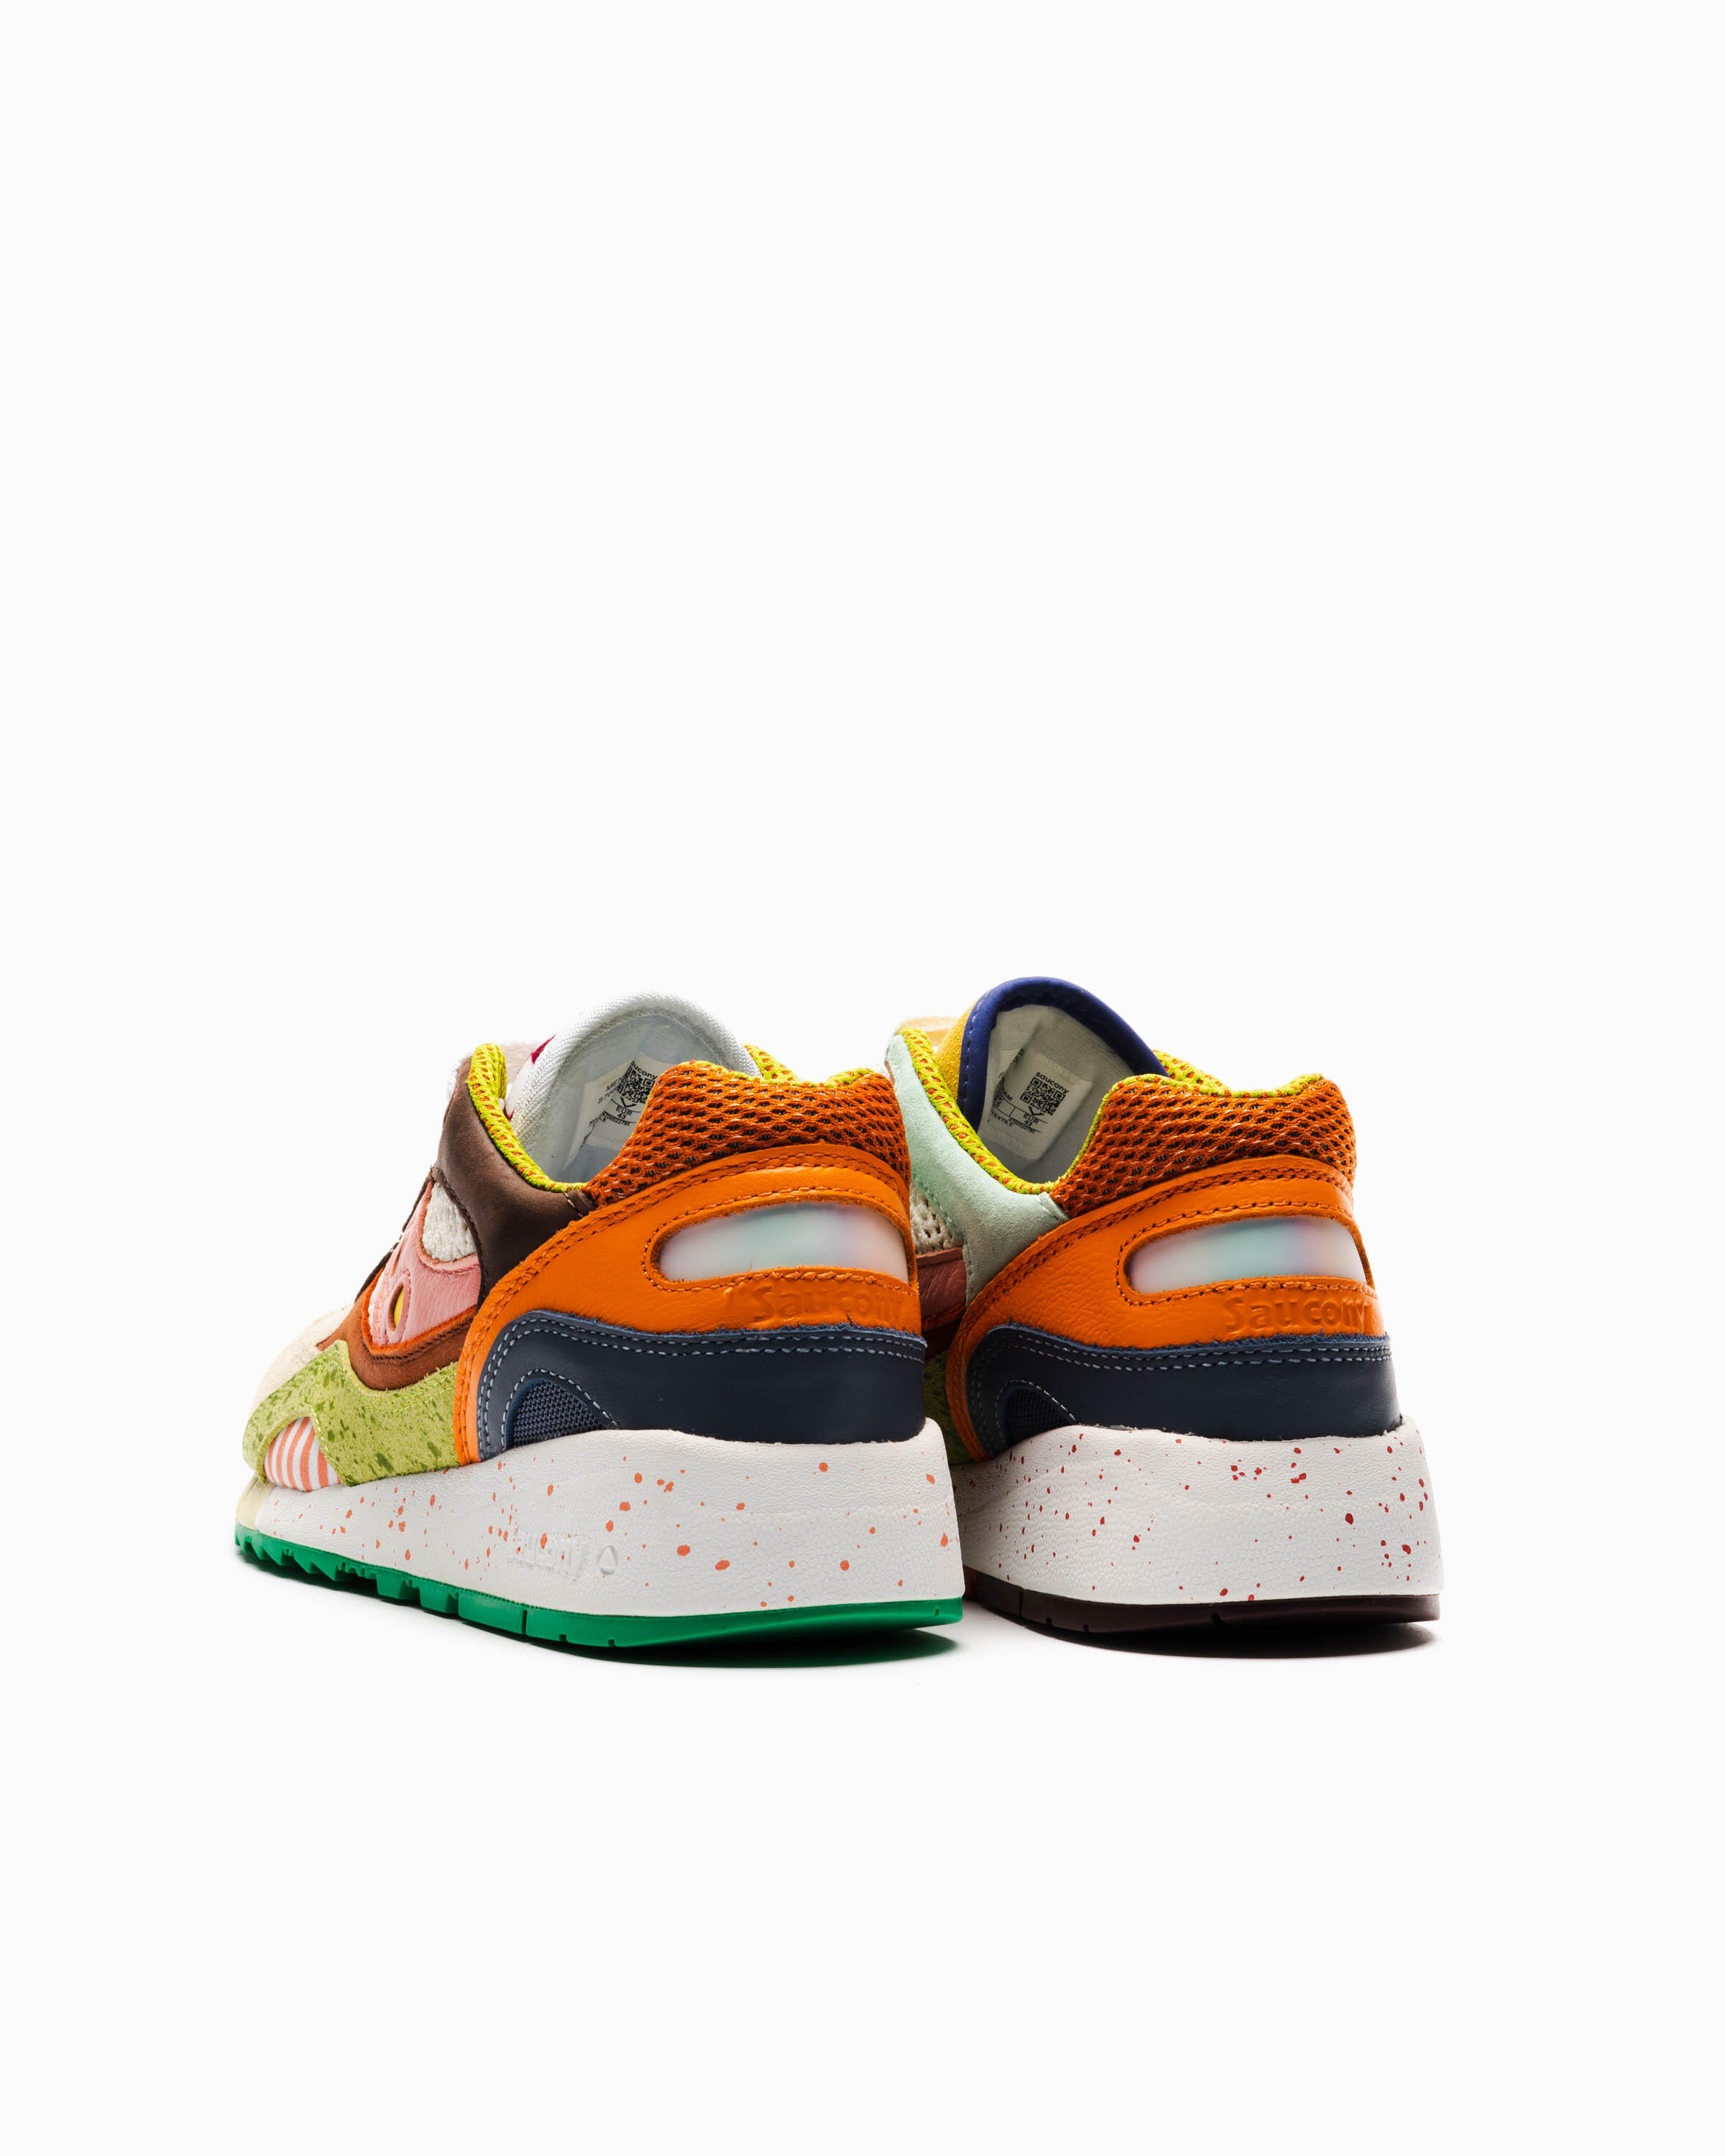 Saucony Shadow 6000 "Food Fight"